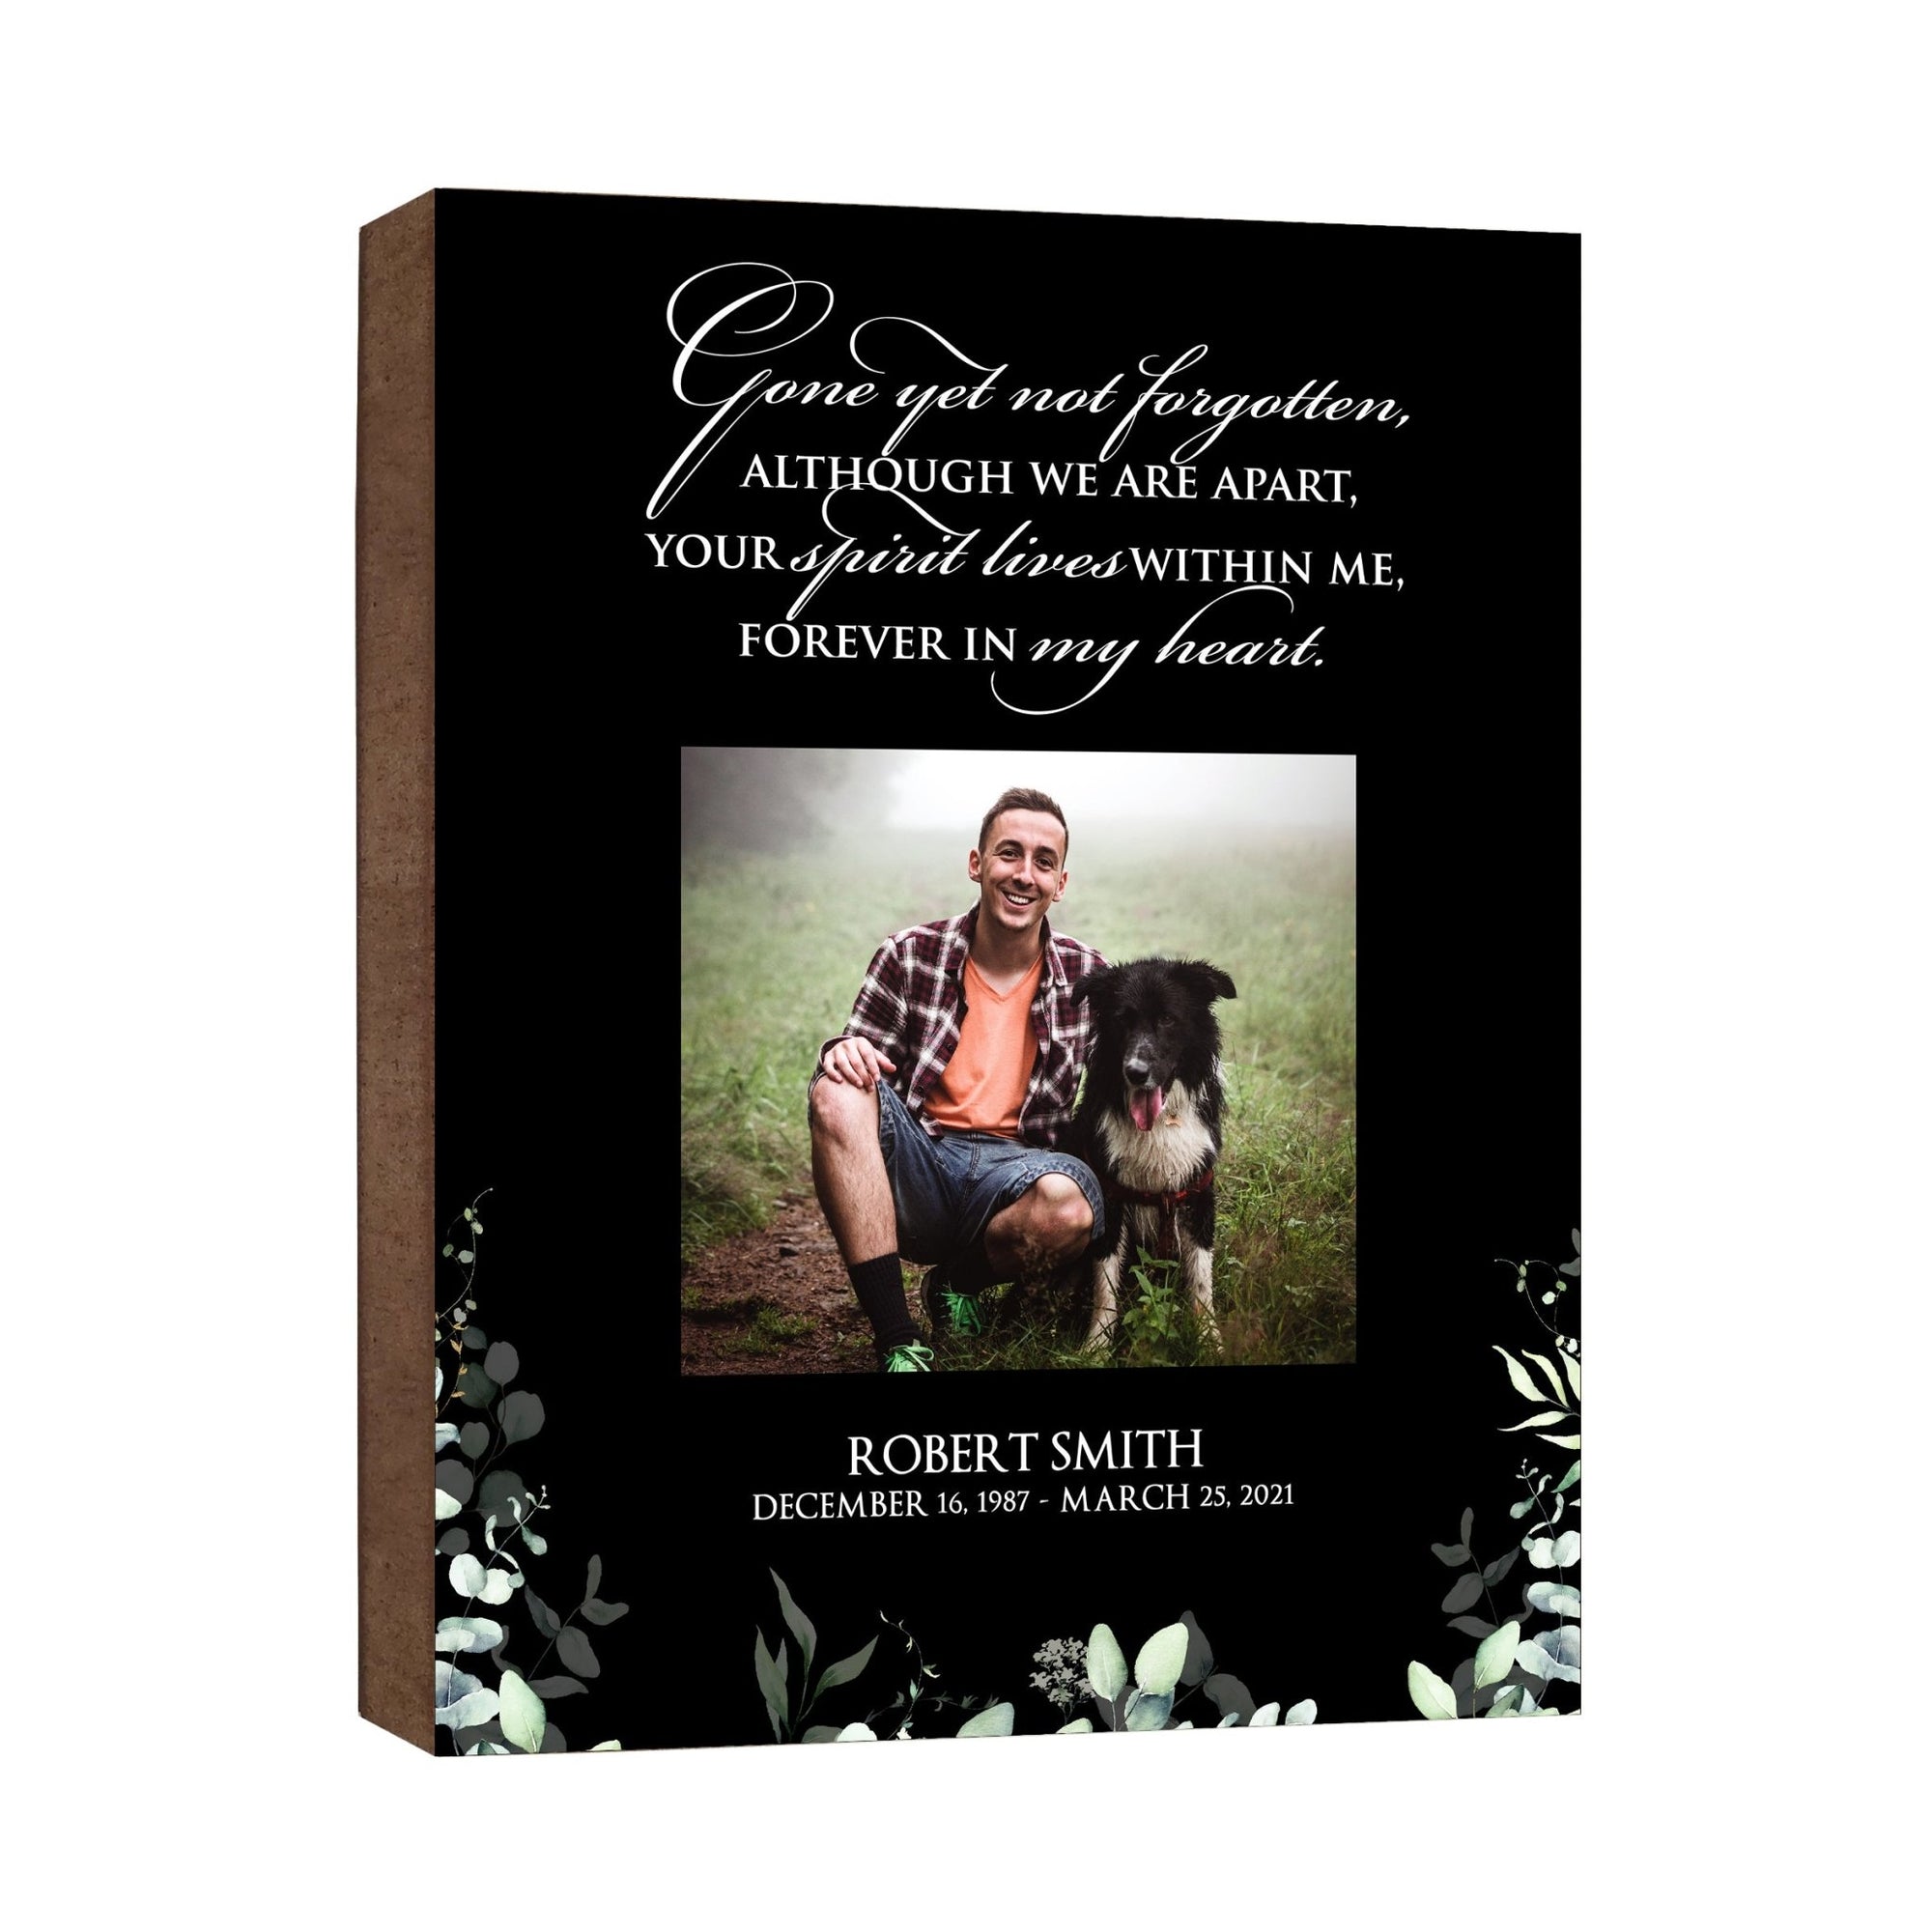 Personalized Human Memorial Black Photo & Inspirational Verse Bereavement Wall Décor & Sympathy Gift Ideas - Gone Yet Not Forgotten - LifeSong Milestones